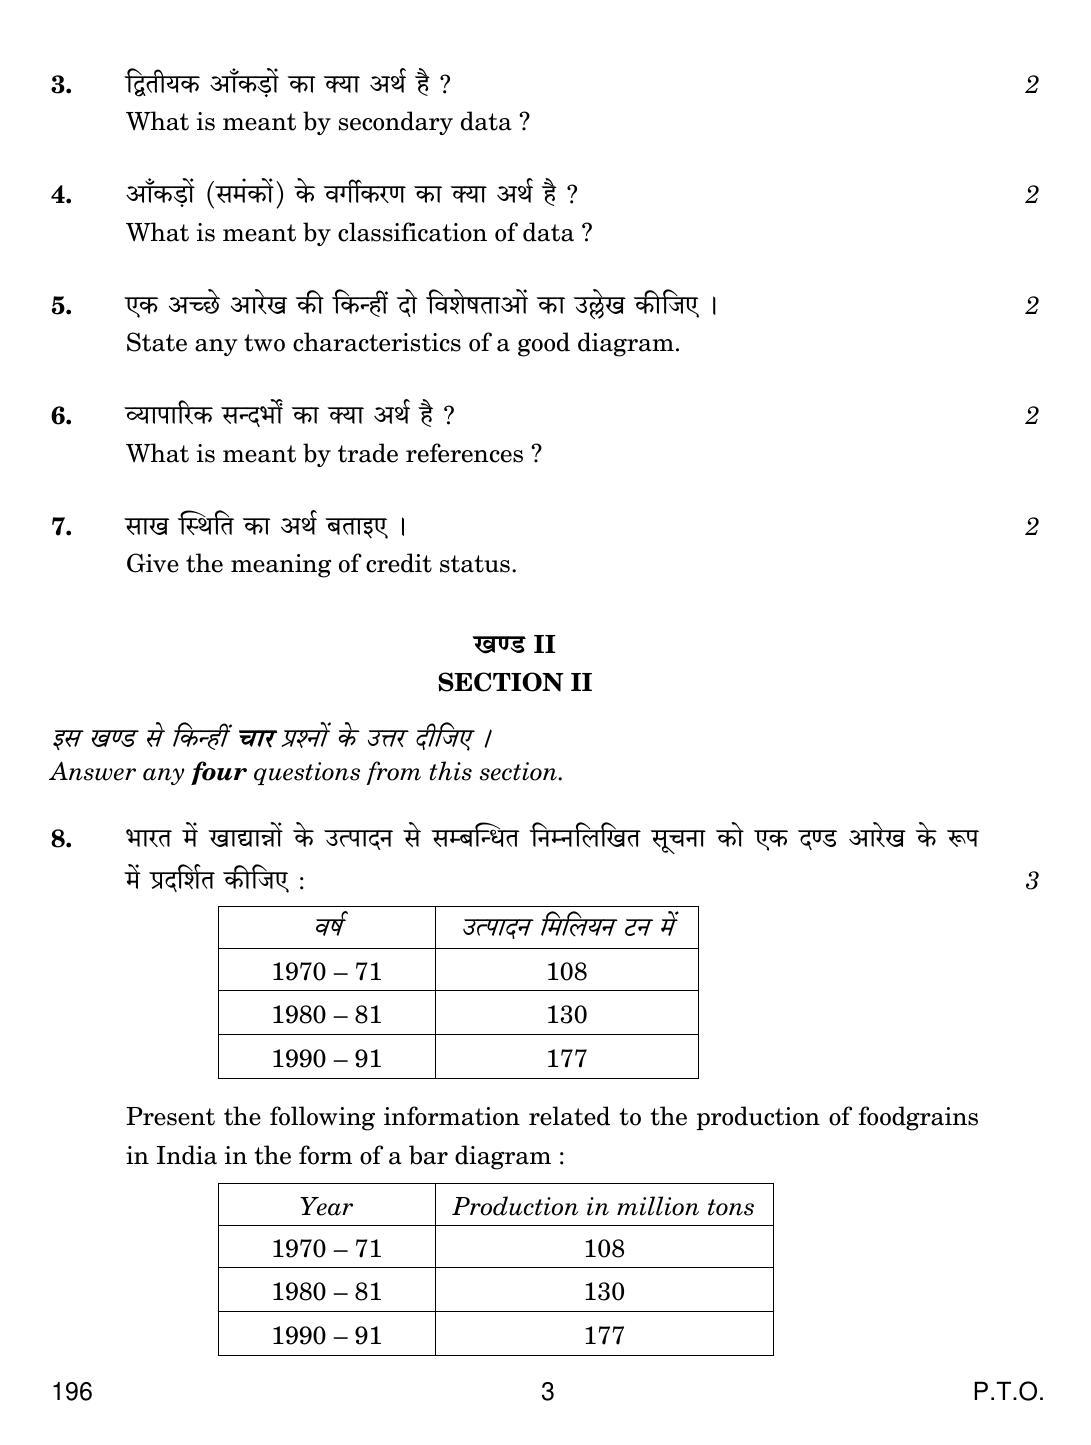 CBSE Class 12 196 OFFICE COMMUNICATION 2018 Question Paper - Page 3